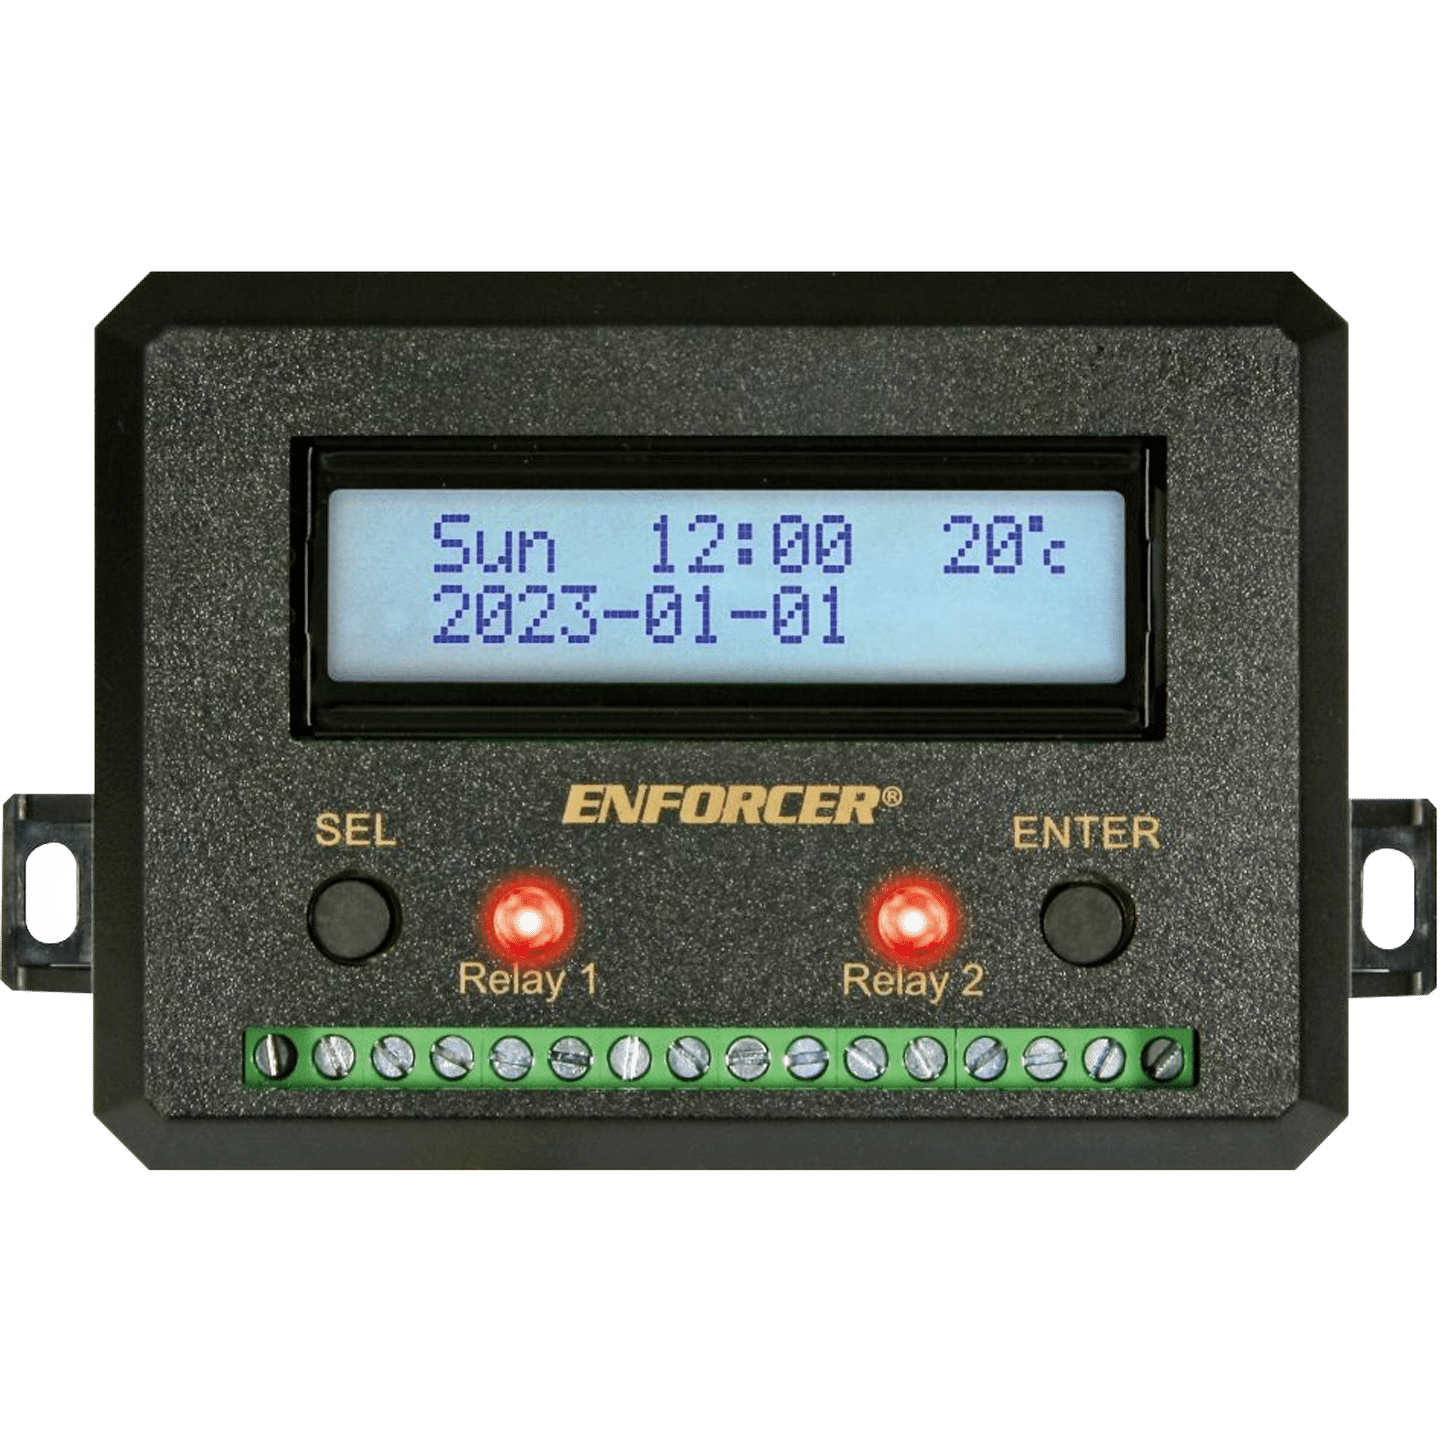 SECO-LARM Annual USA Two Inc Relay Timer - with 365-Day Outputs